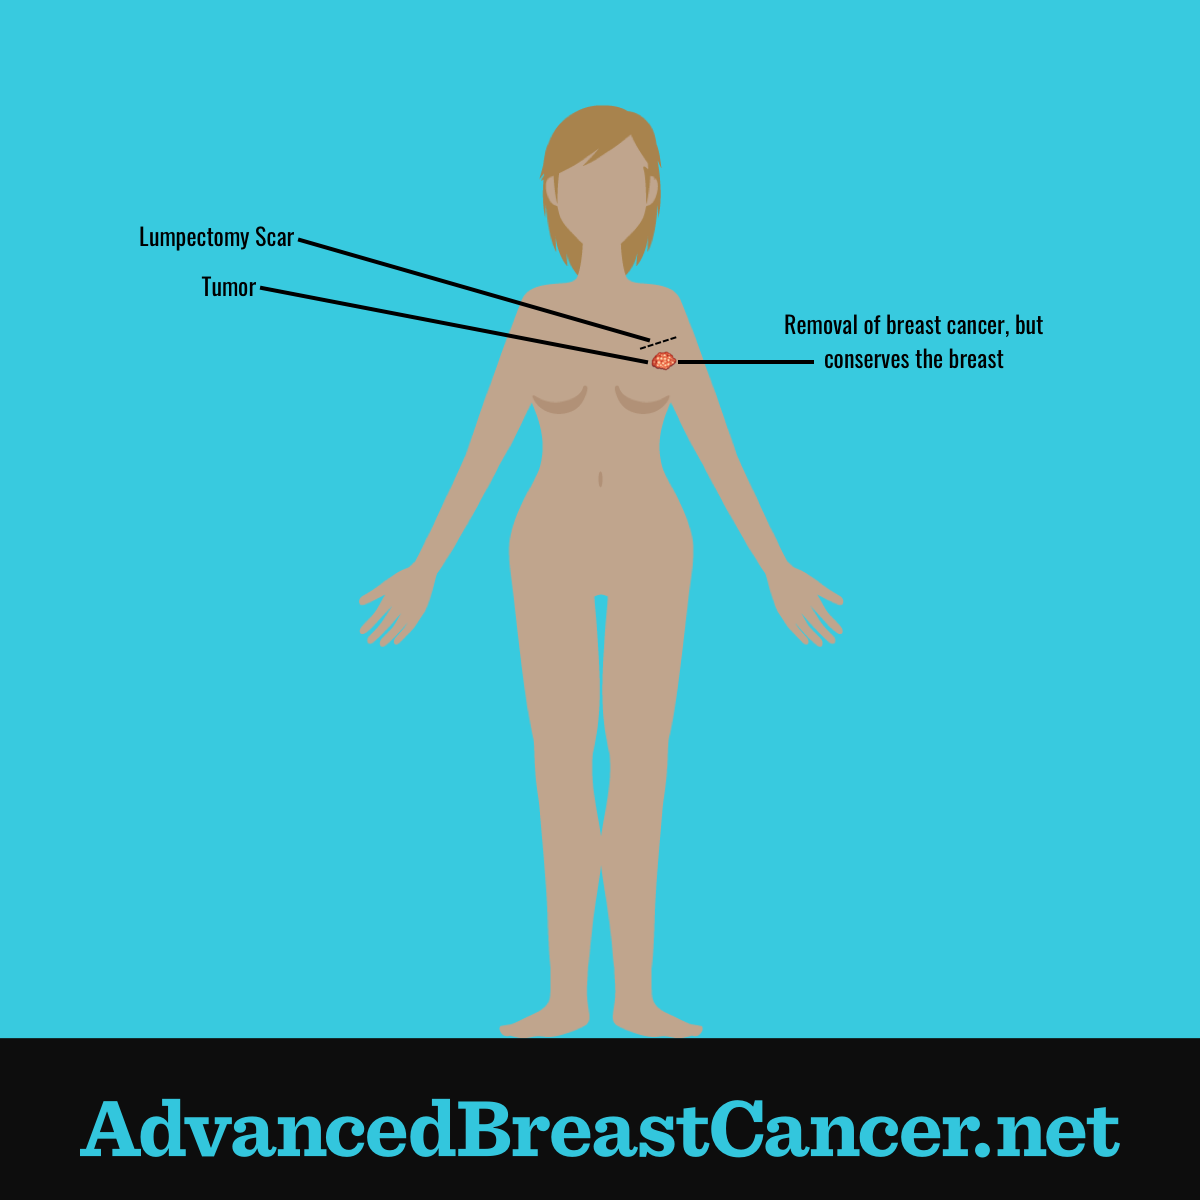 Human figure showing for this surgery the tumor is removed, the breast is conserved and a small scar is at the top of the breast.